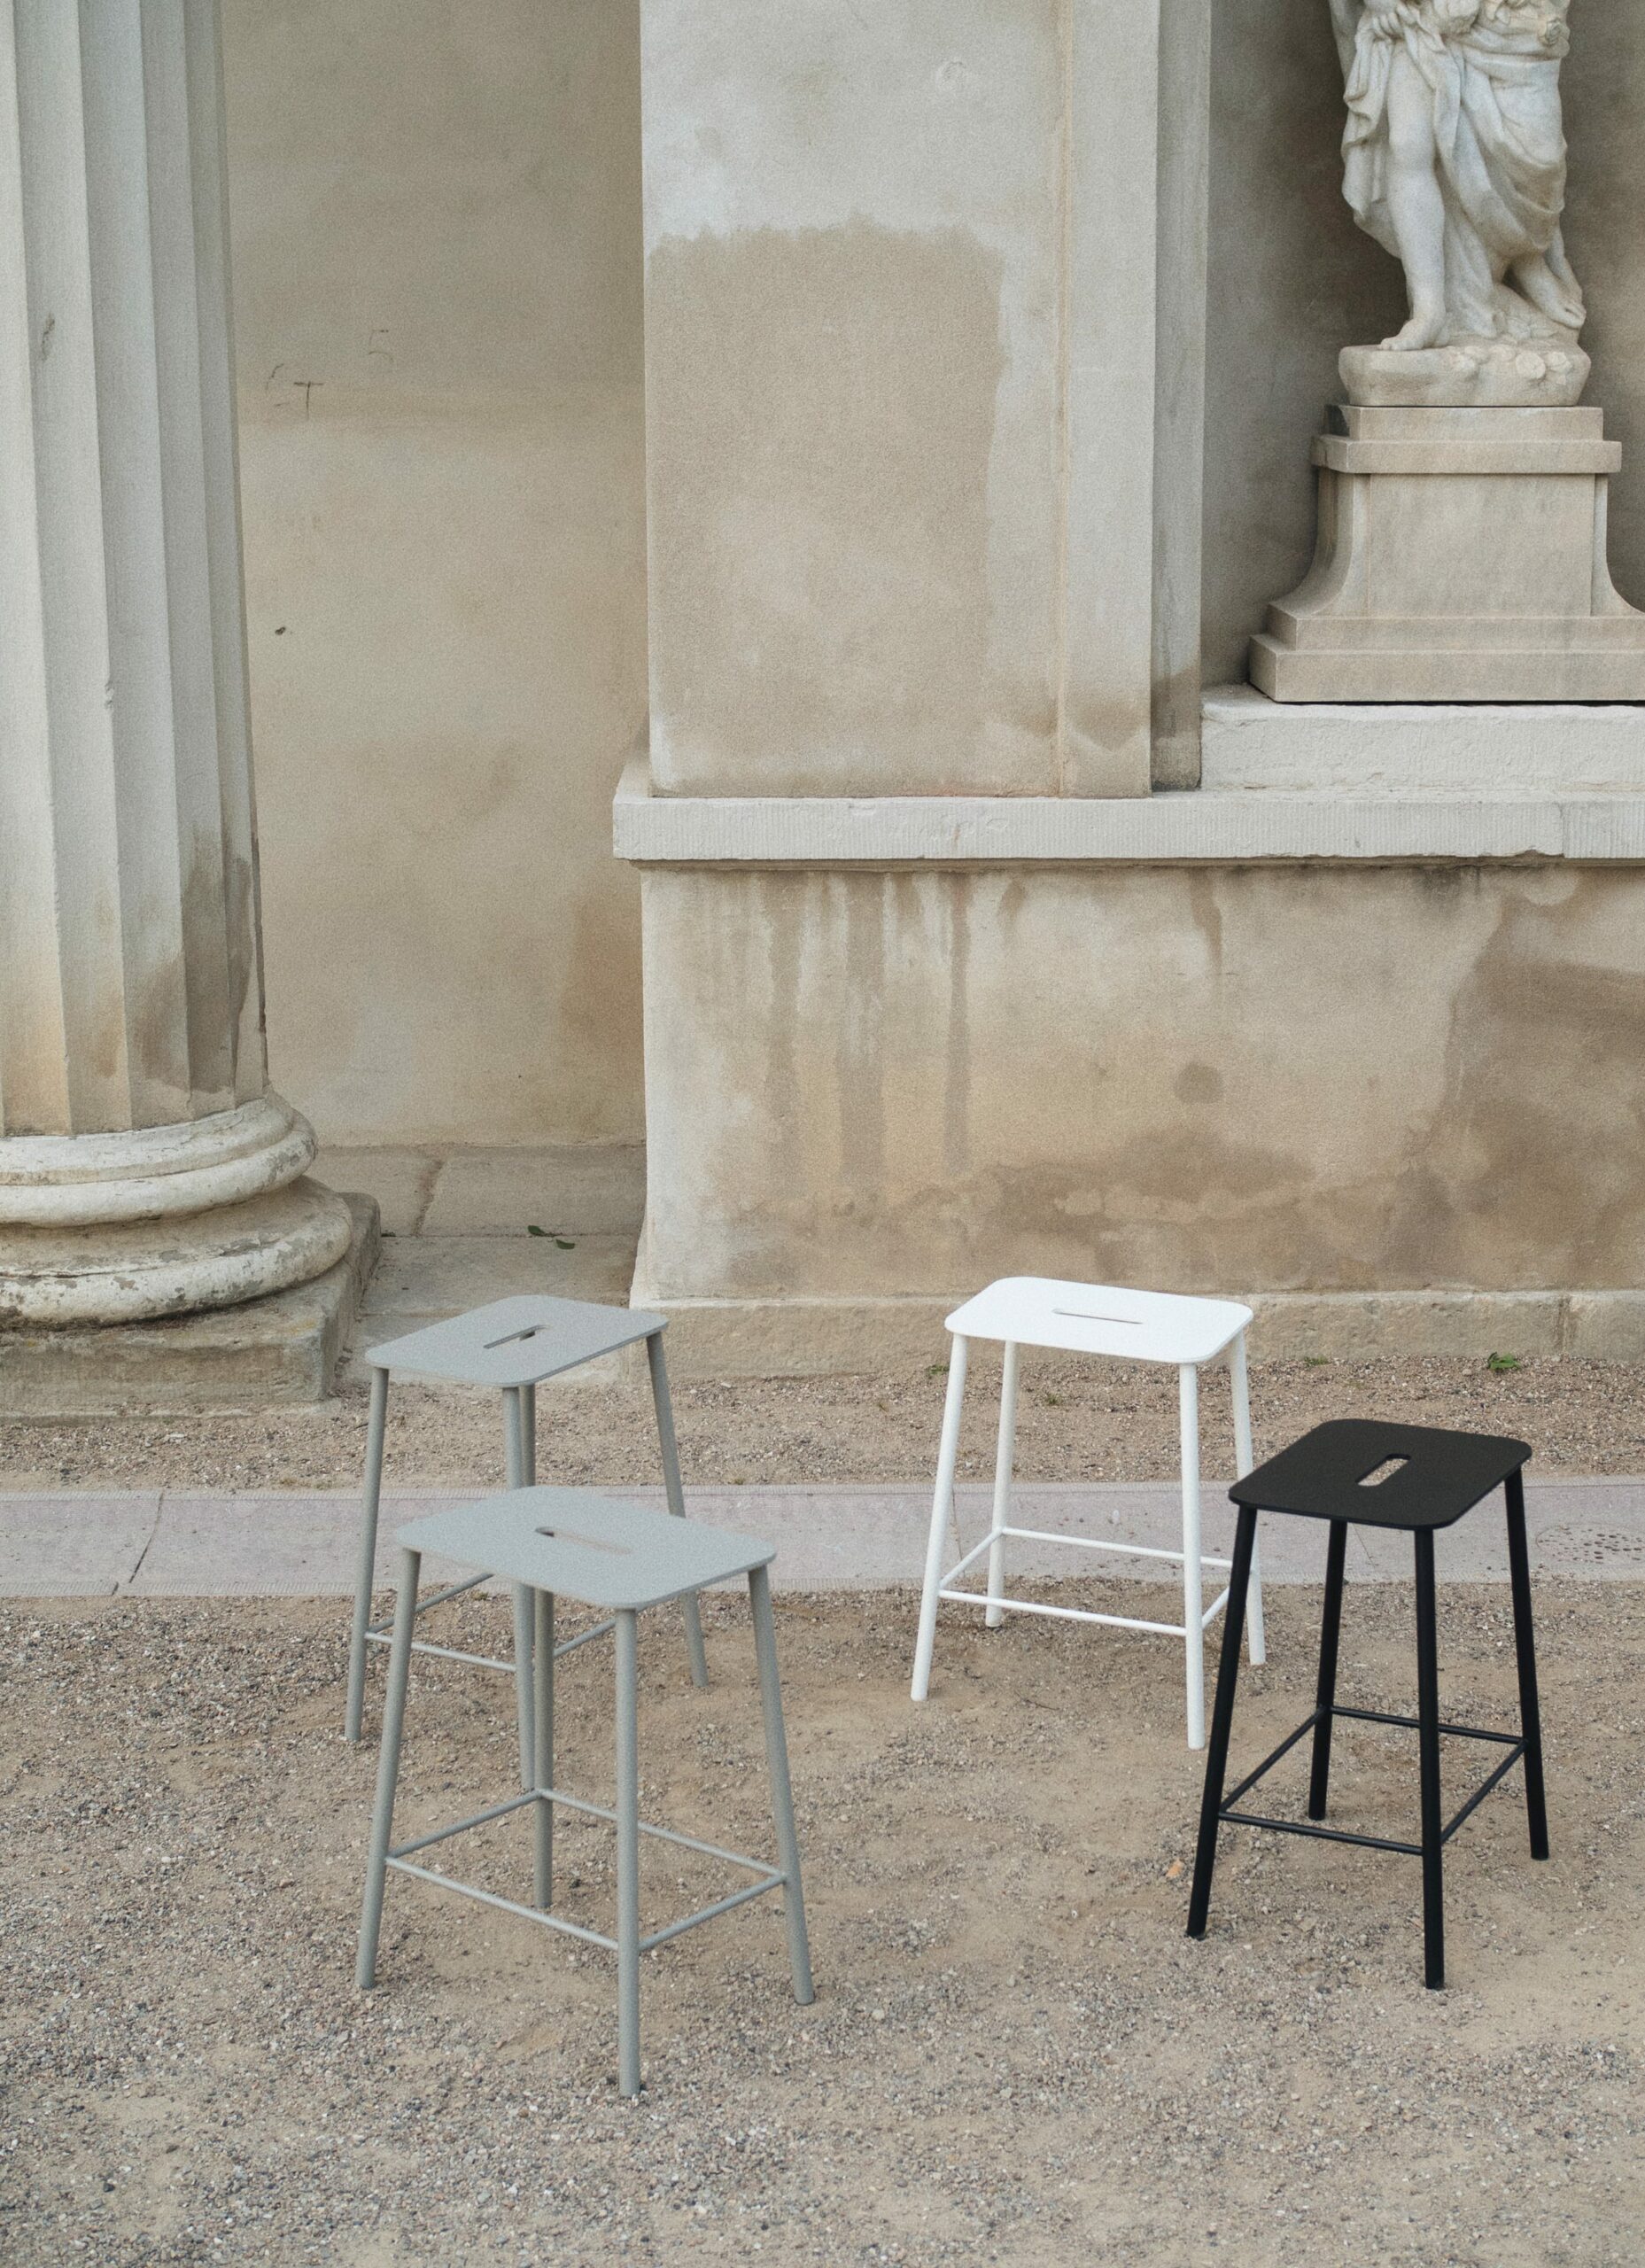 Adam Stool - Mono - Outdoor - available in 3 sizes and 3 colors